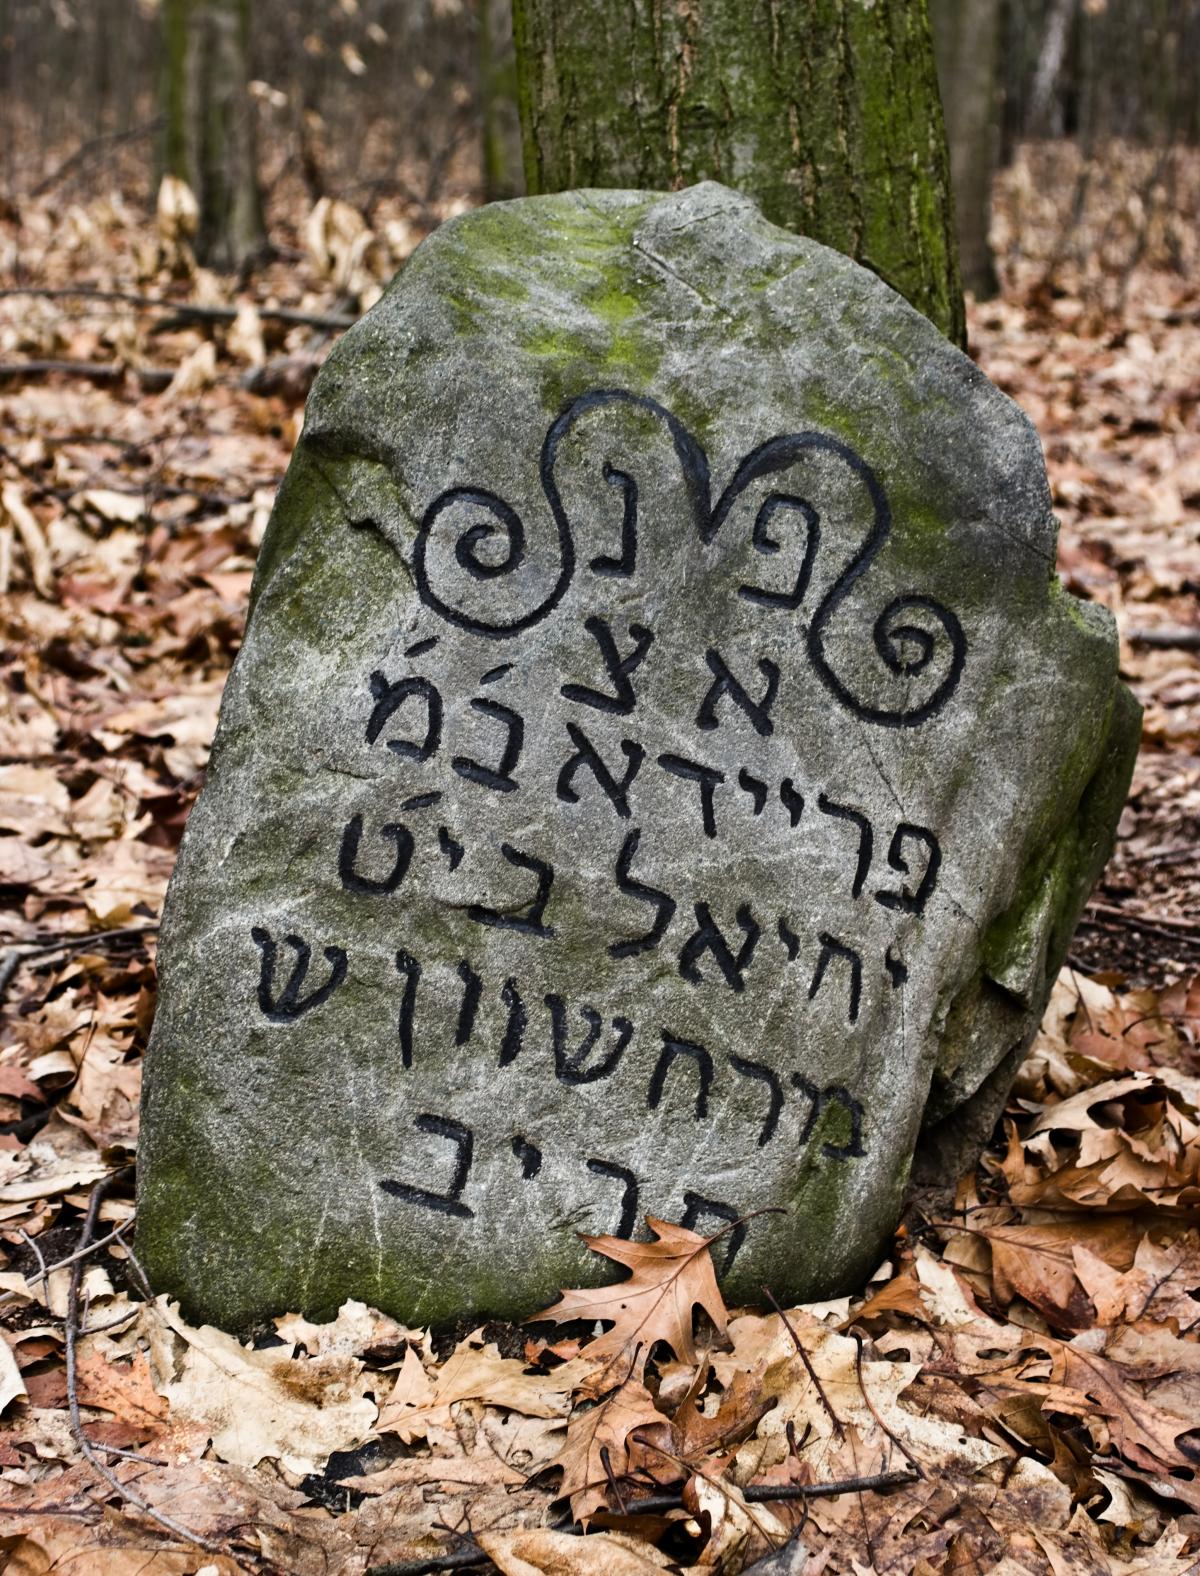 Wikipedia, Jewish cemetery in Kock, Media with locations, Pages with maps, Quality images, Self-publ